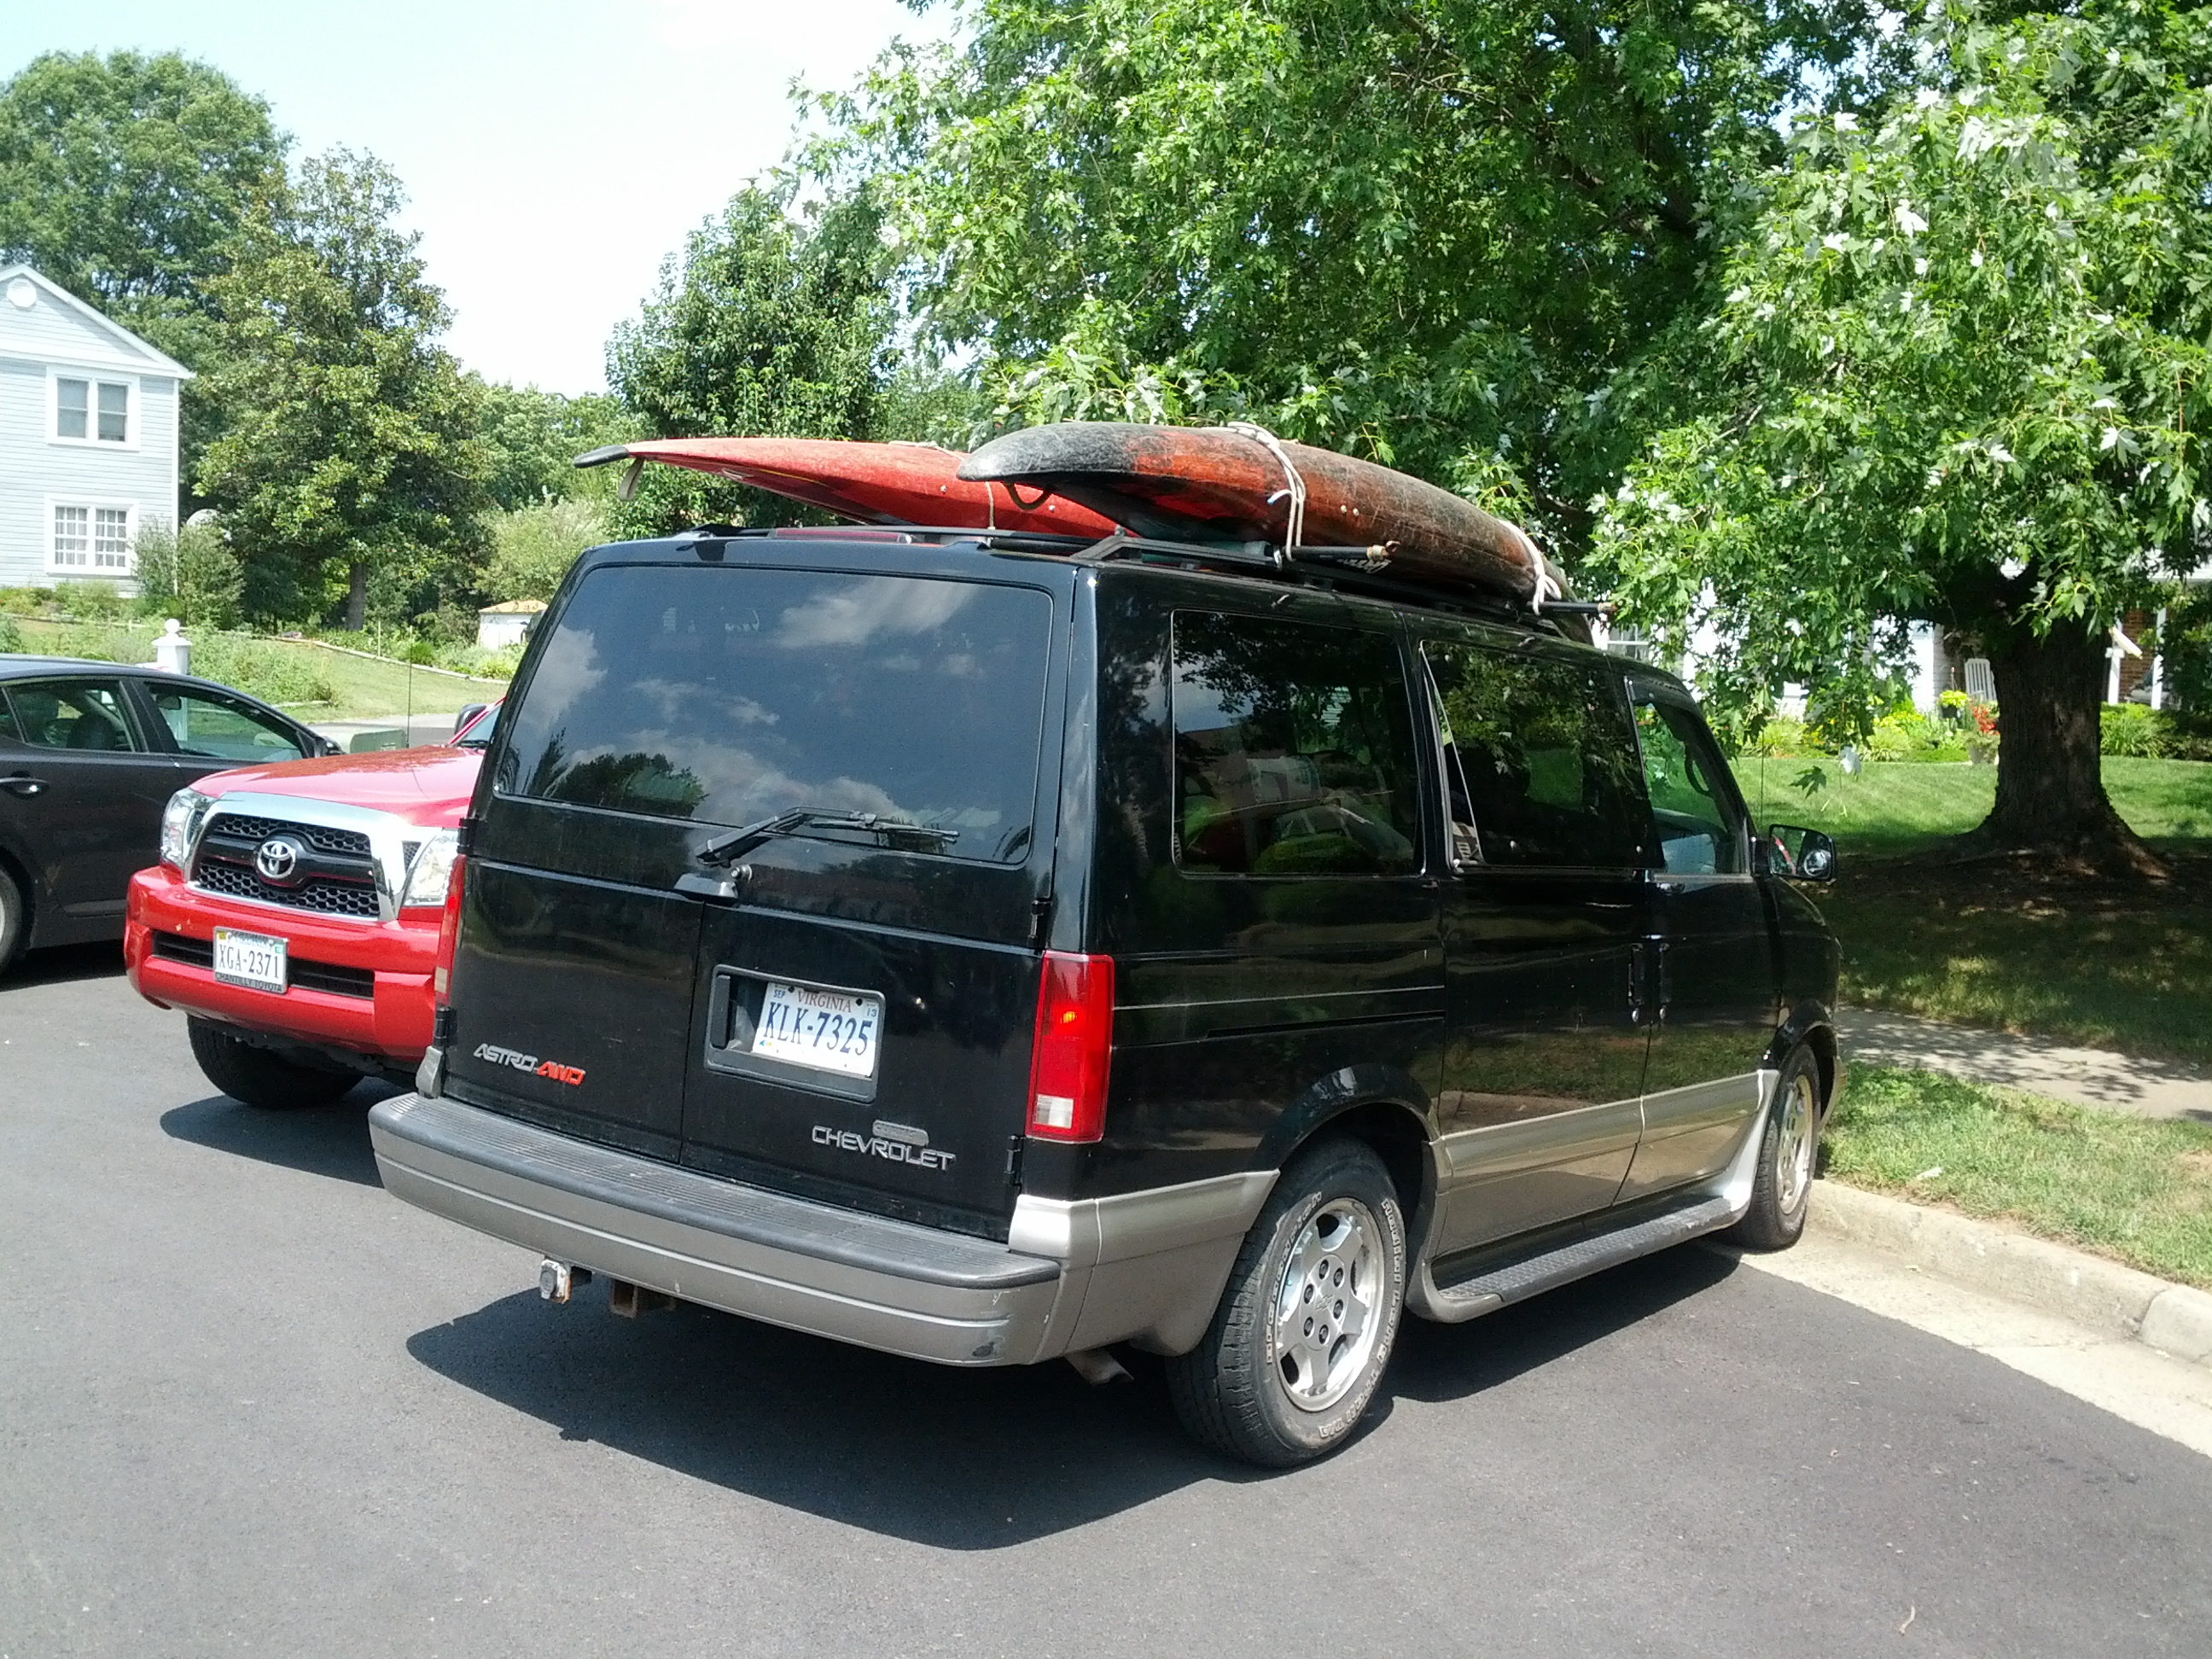 Astro With Boats On RoofRacks 1.jpg